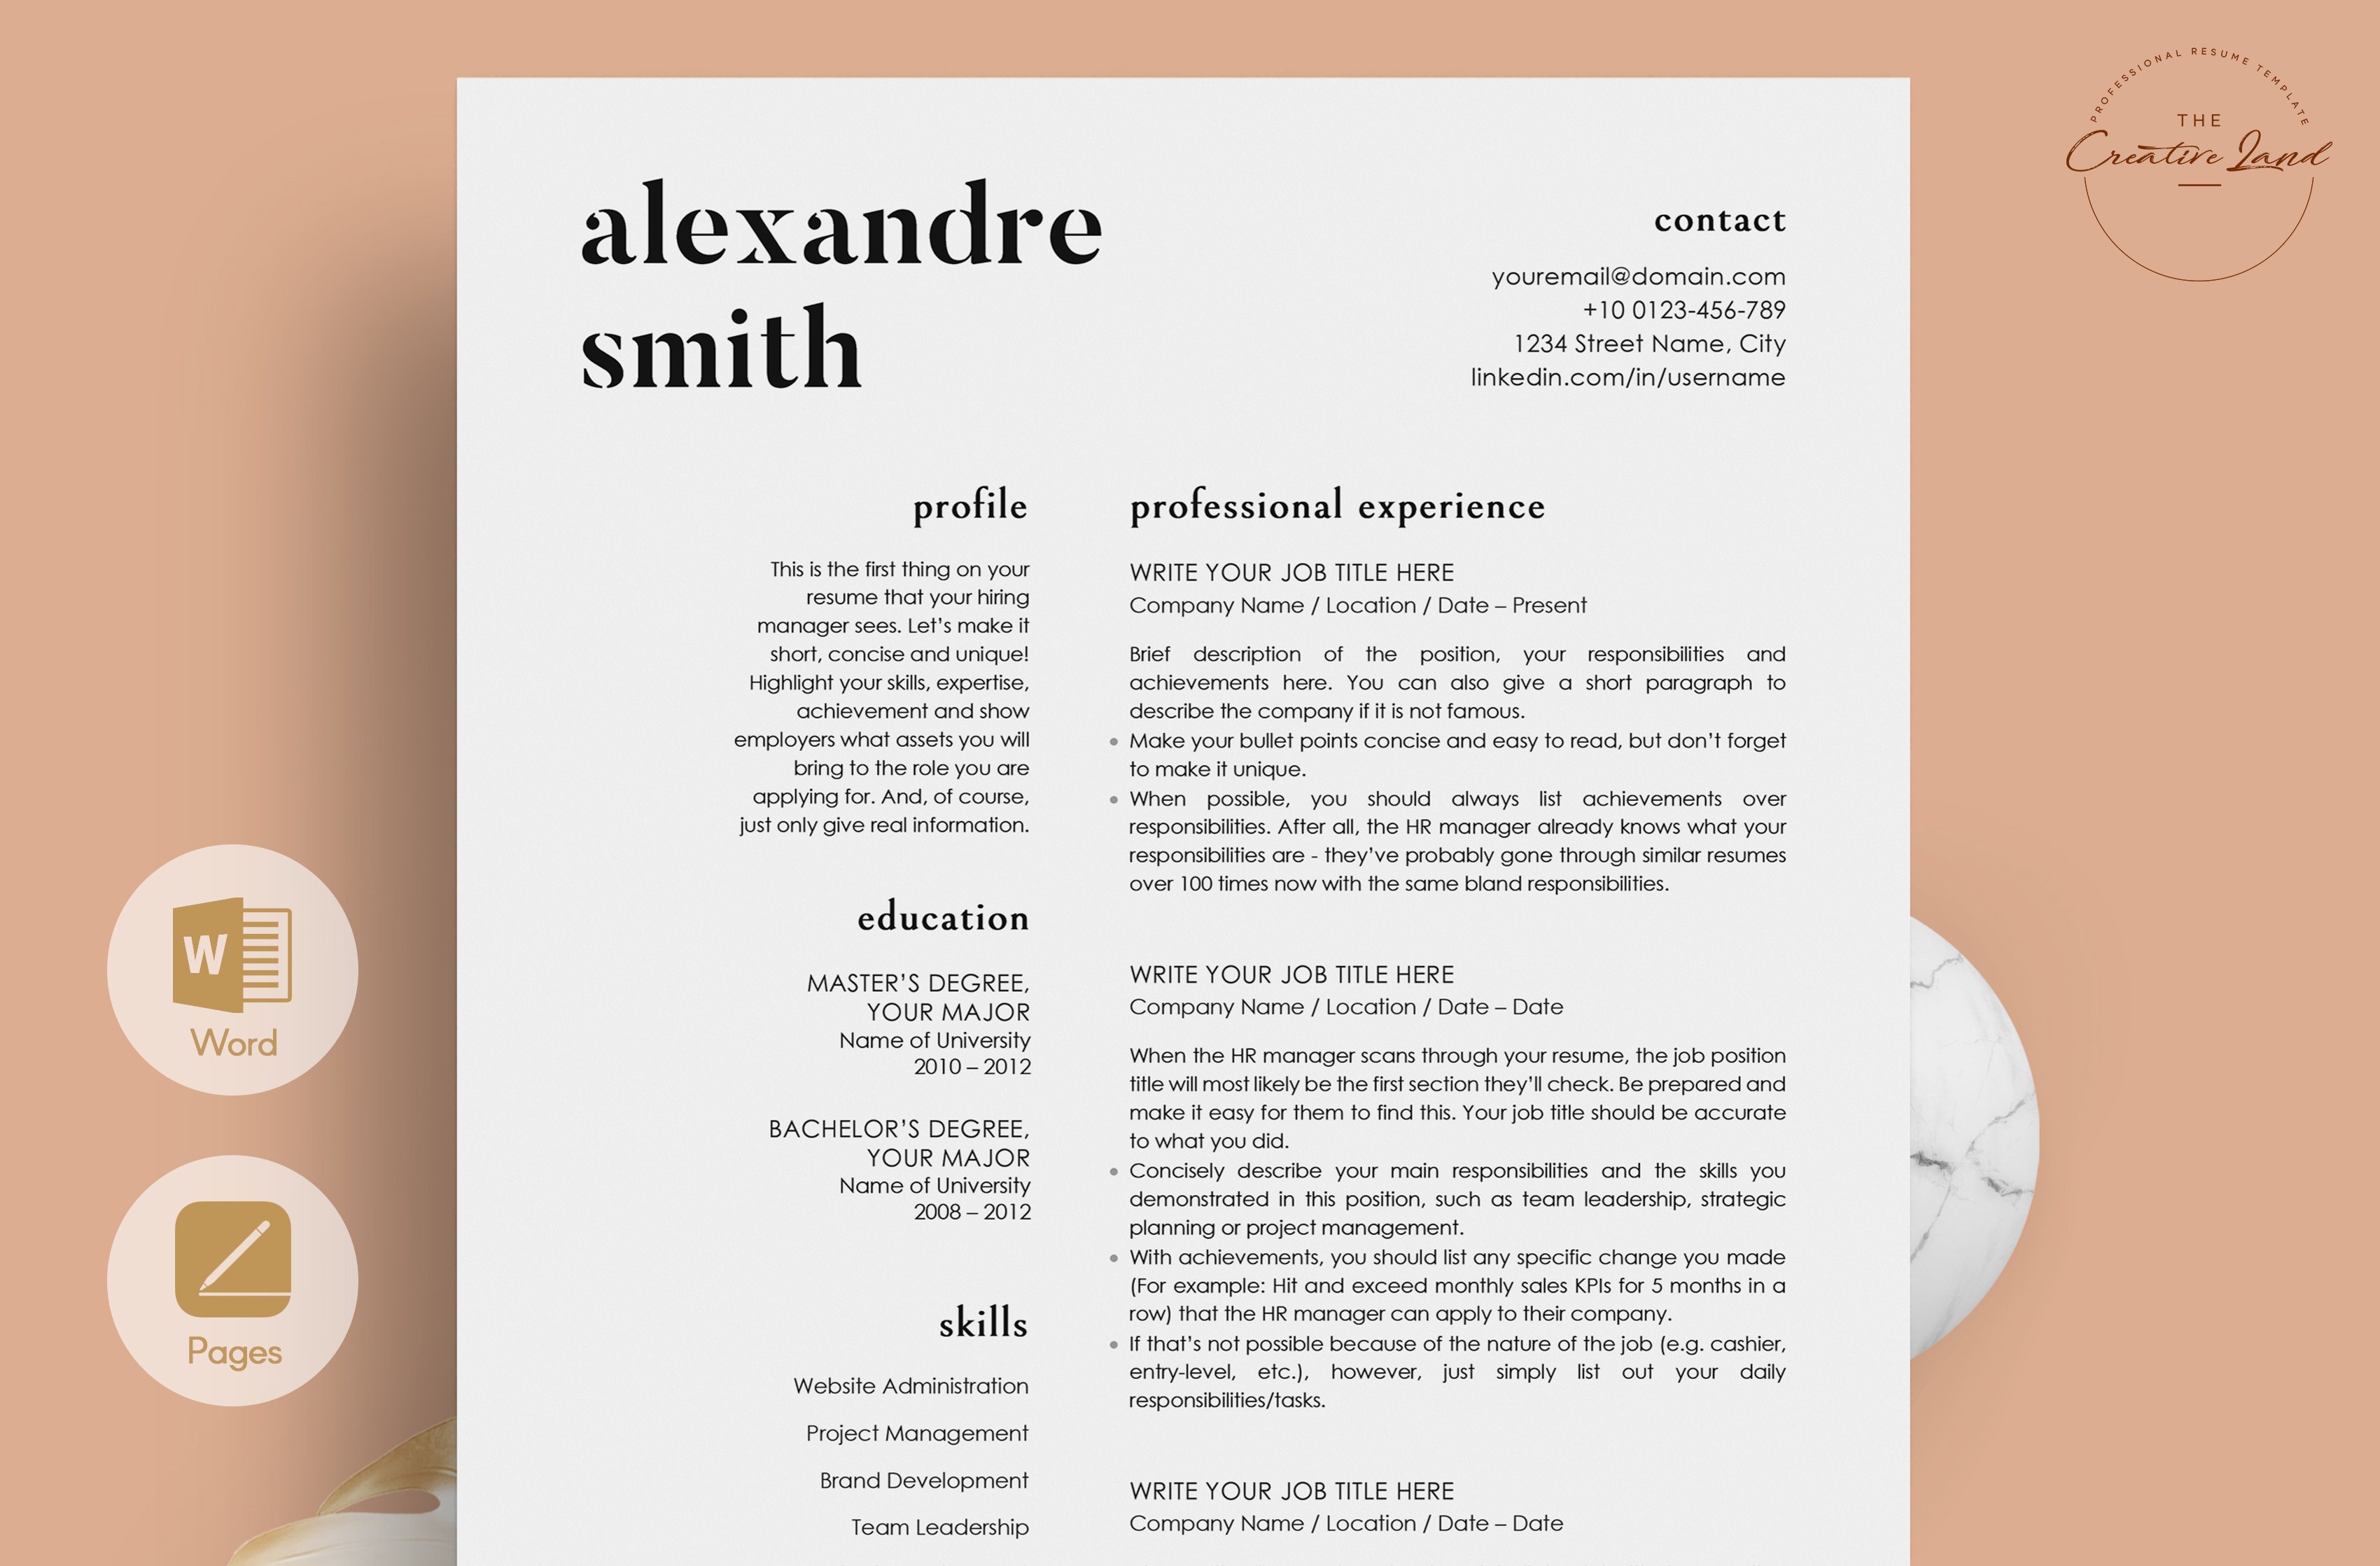 Resume/CV - The Smith cover image.